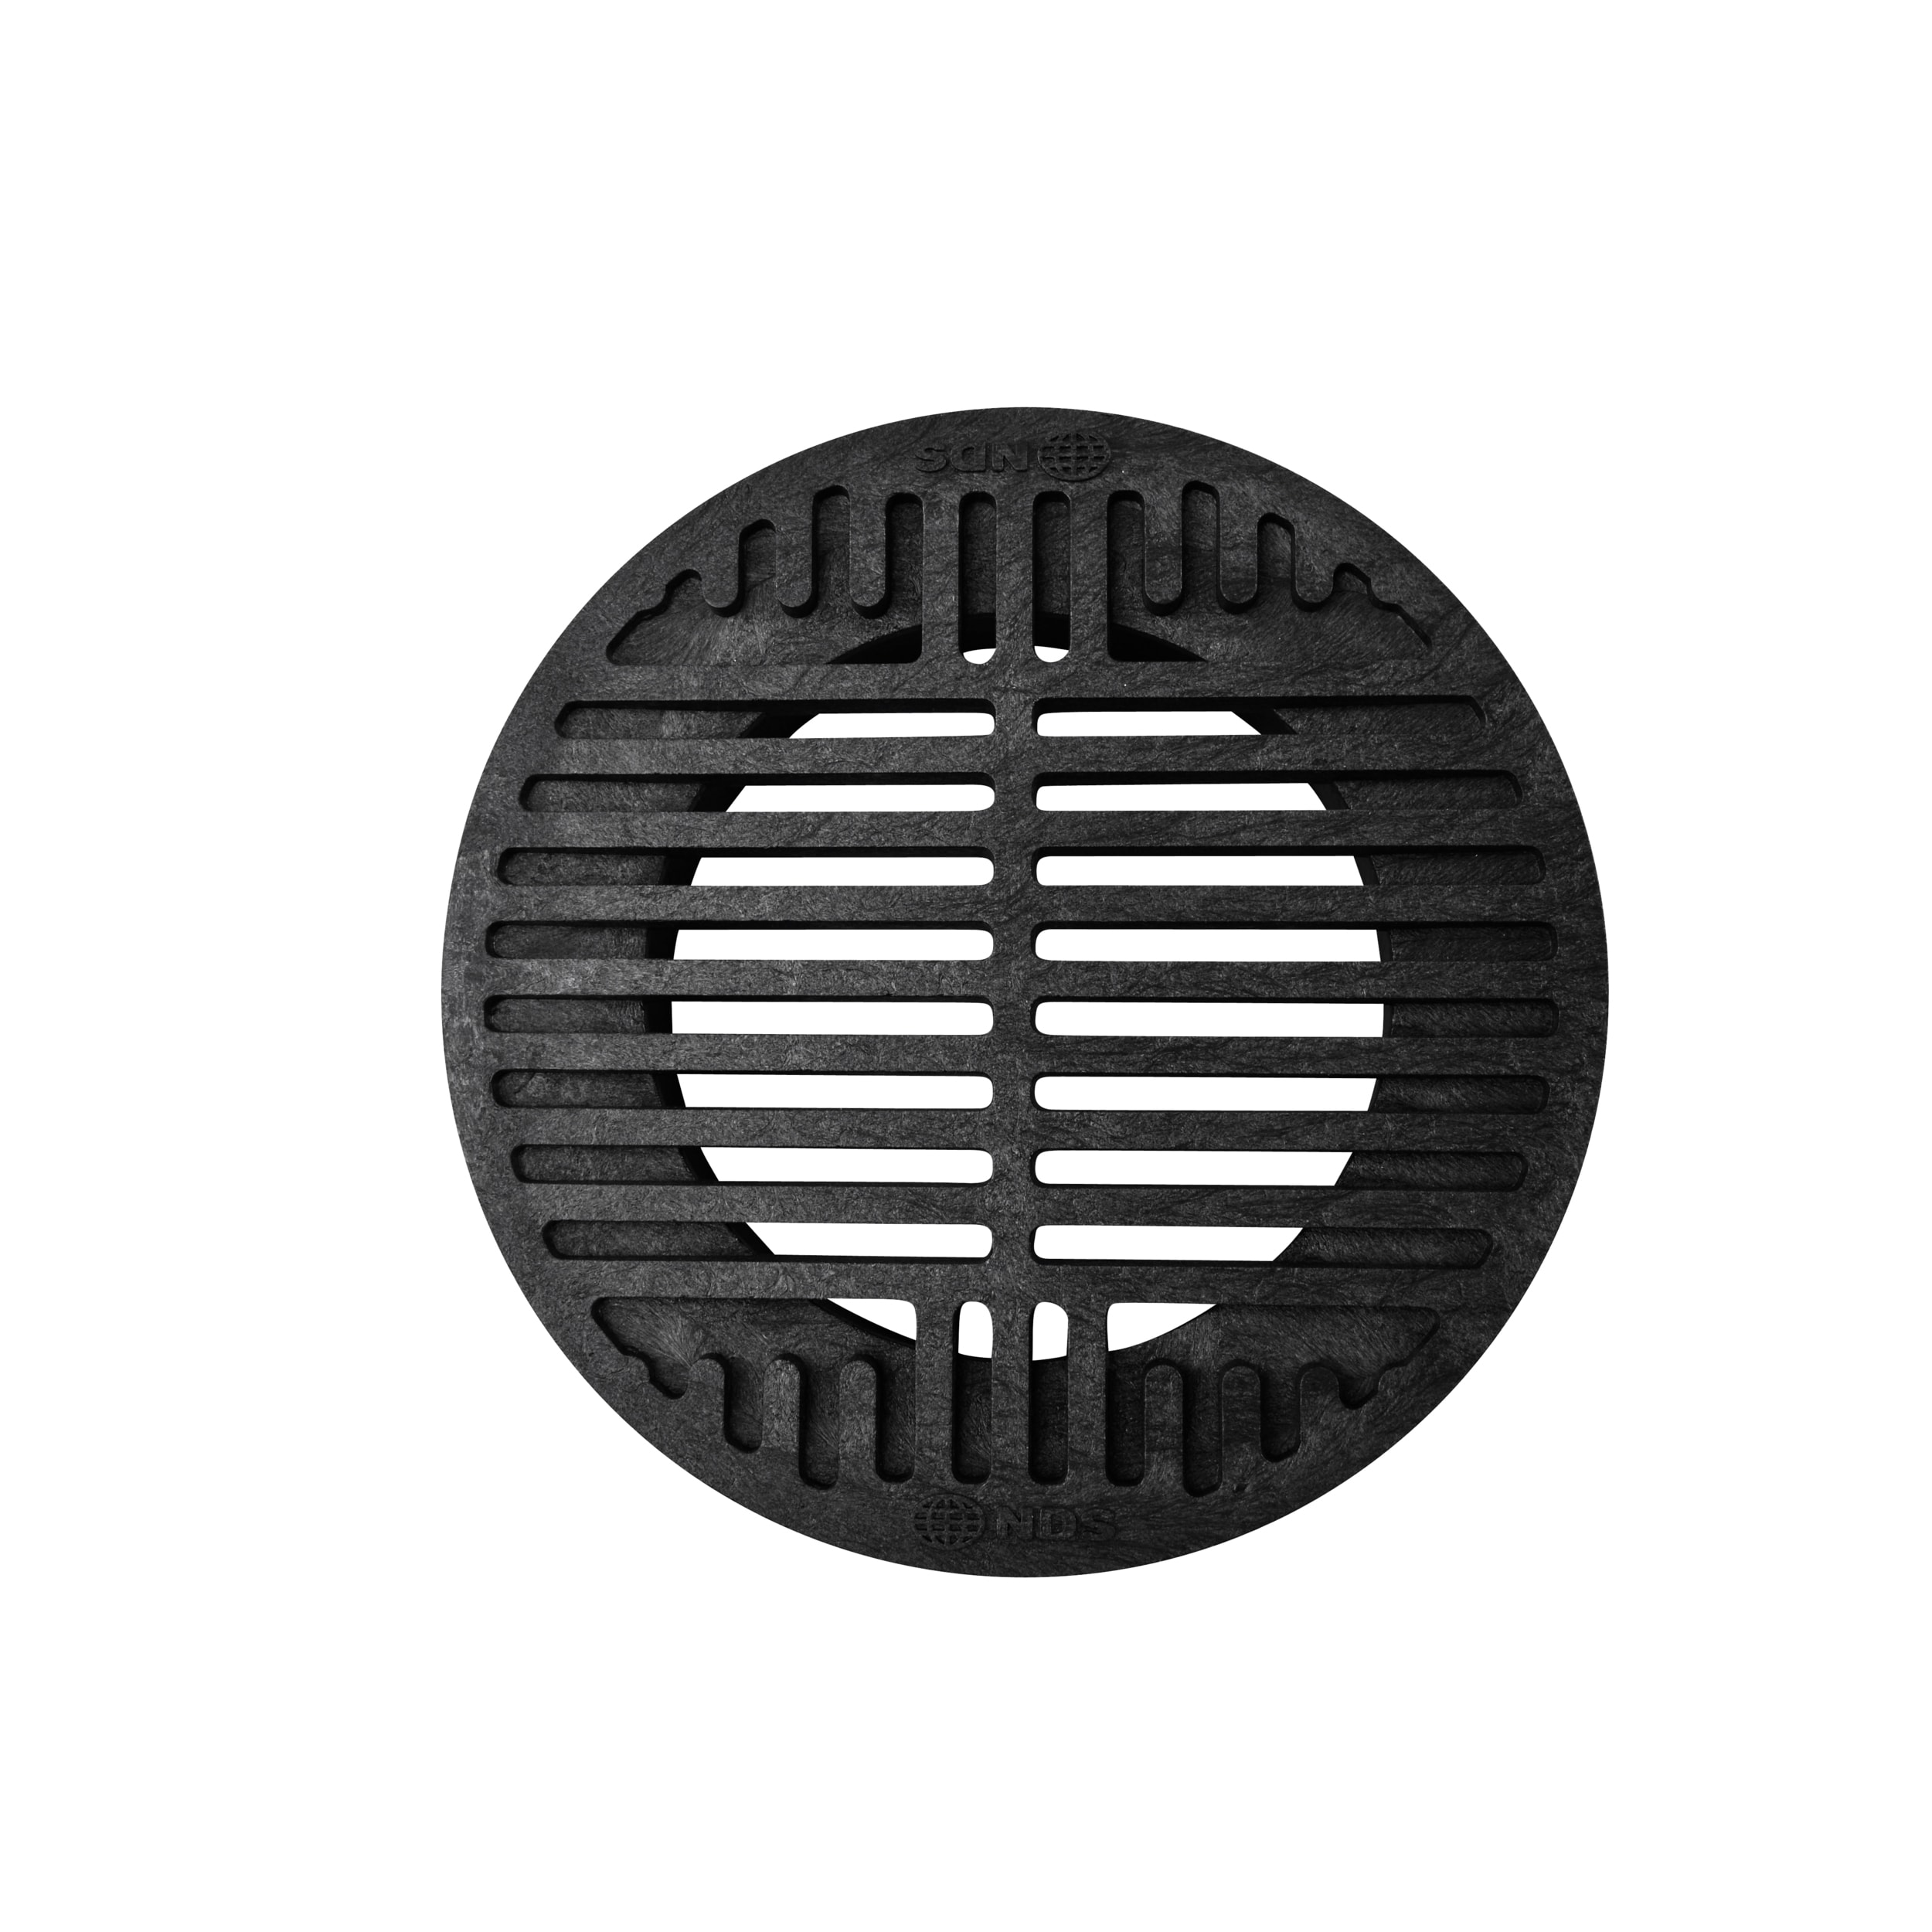 StormDrain 3 Green Outdoor Round Flat Drain Grate Cover - Superior  Strength and Durability - Fits 3 Inch Sewer & Drain Pipe / Fittings,  Triple Wall